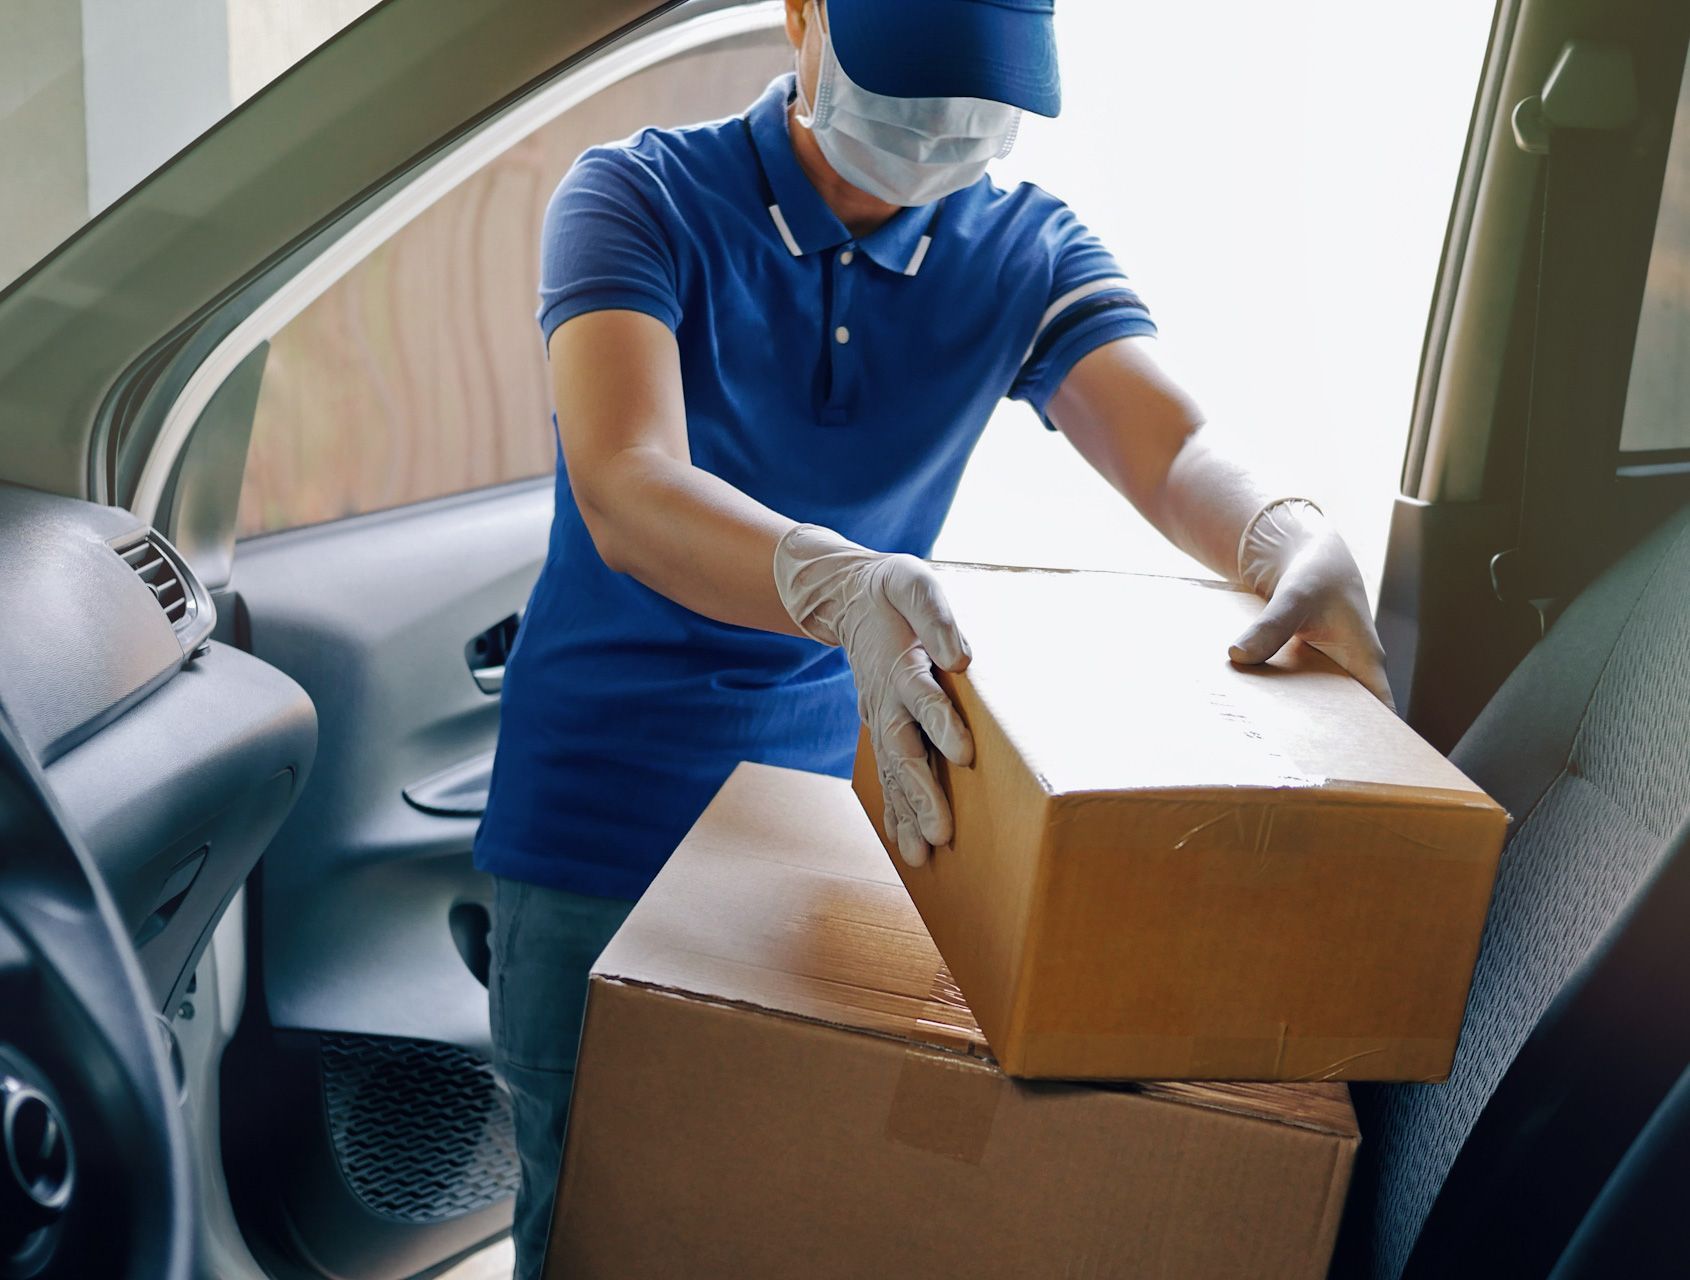 A delivery man wearing a mask and gloves is loading boxes into a car.